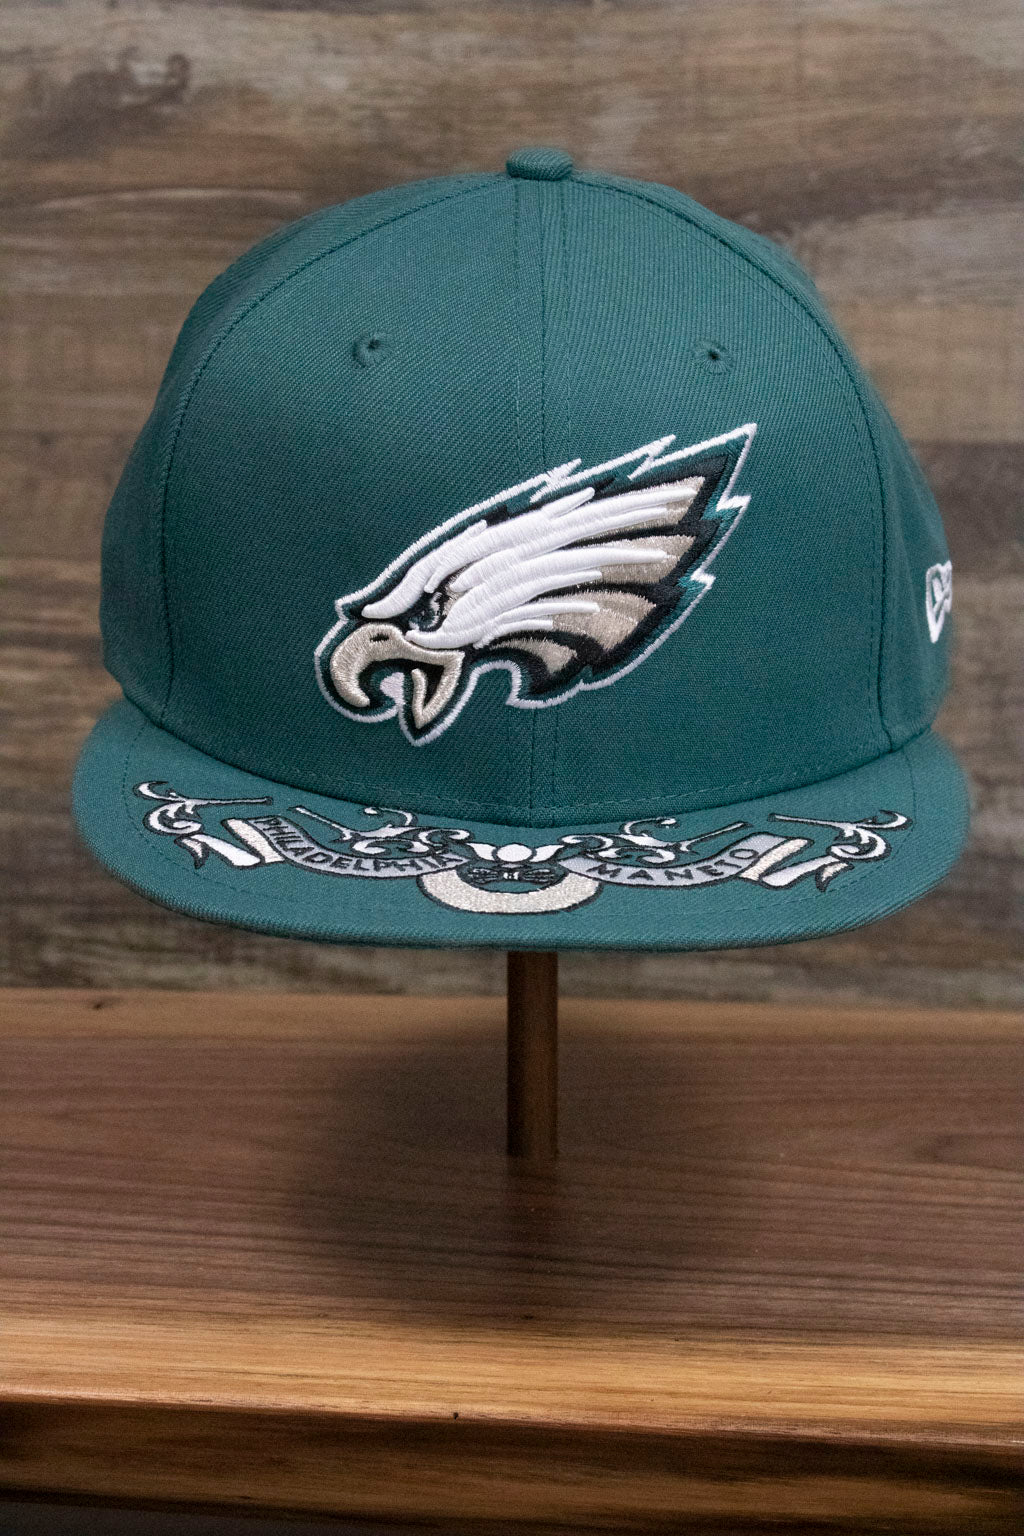 the Philadelphia Eagles NFL Draft 2019 Snapback Hat | Philly Eagles Midnight Green 9Fifty Snapback Draft Hat has an XL Eagles logo on the front and a Philadelphia Maneto slogan in latin on the brim